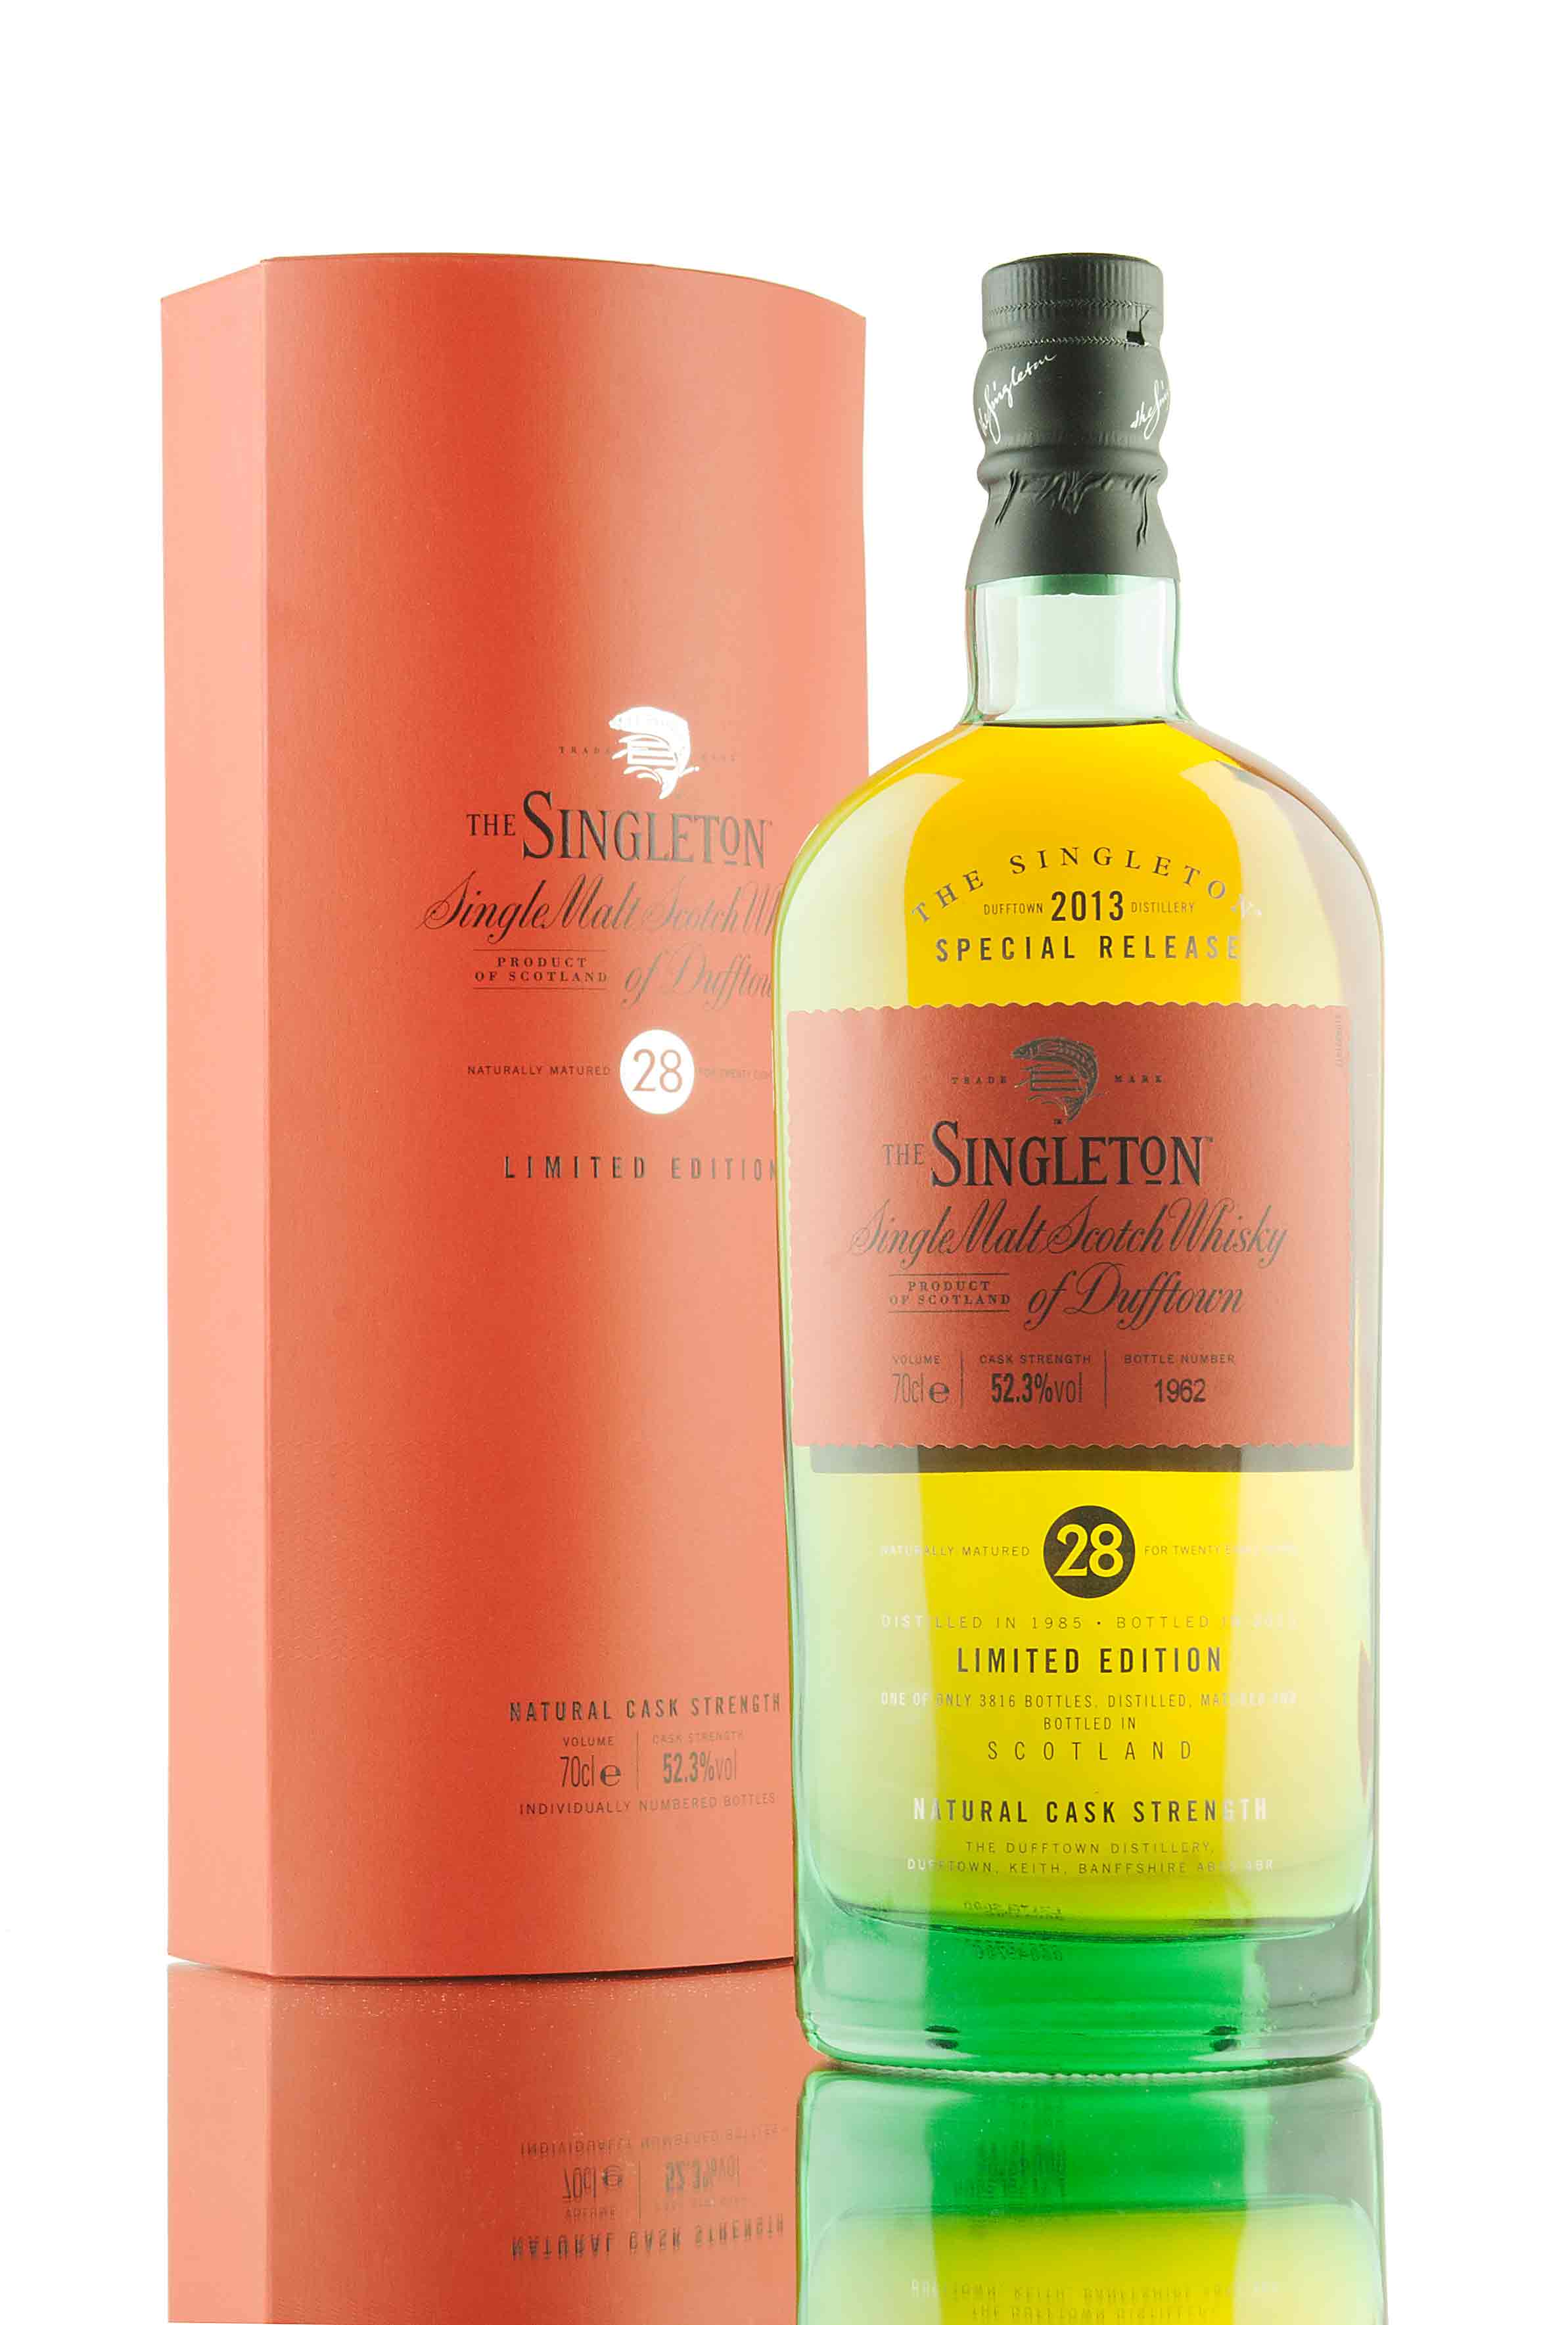 The Singleton of Dufftown 28 Year Old | 2013 Special Release